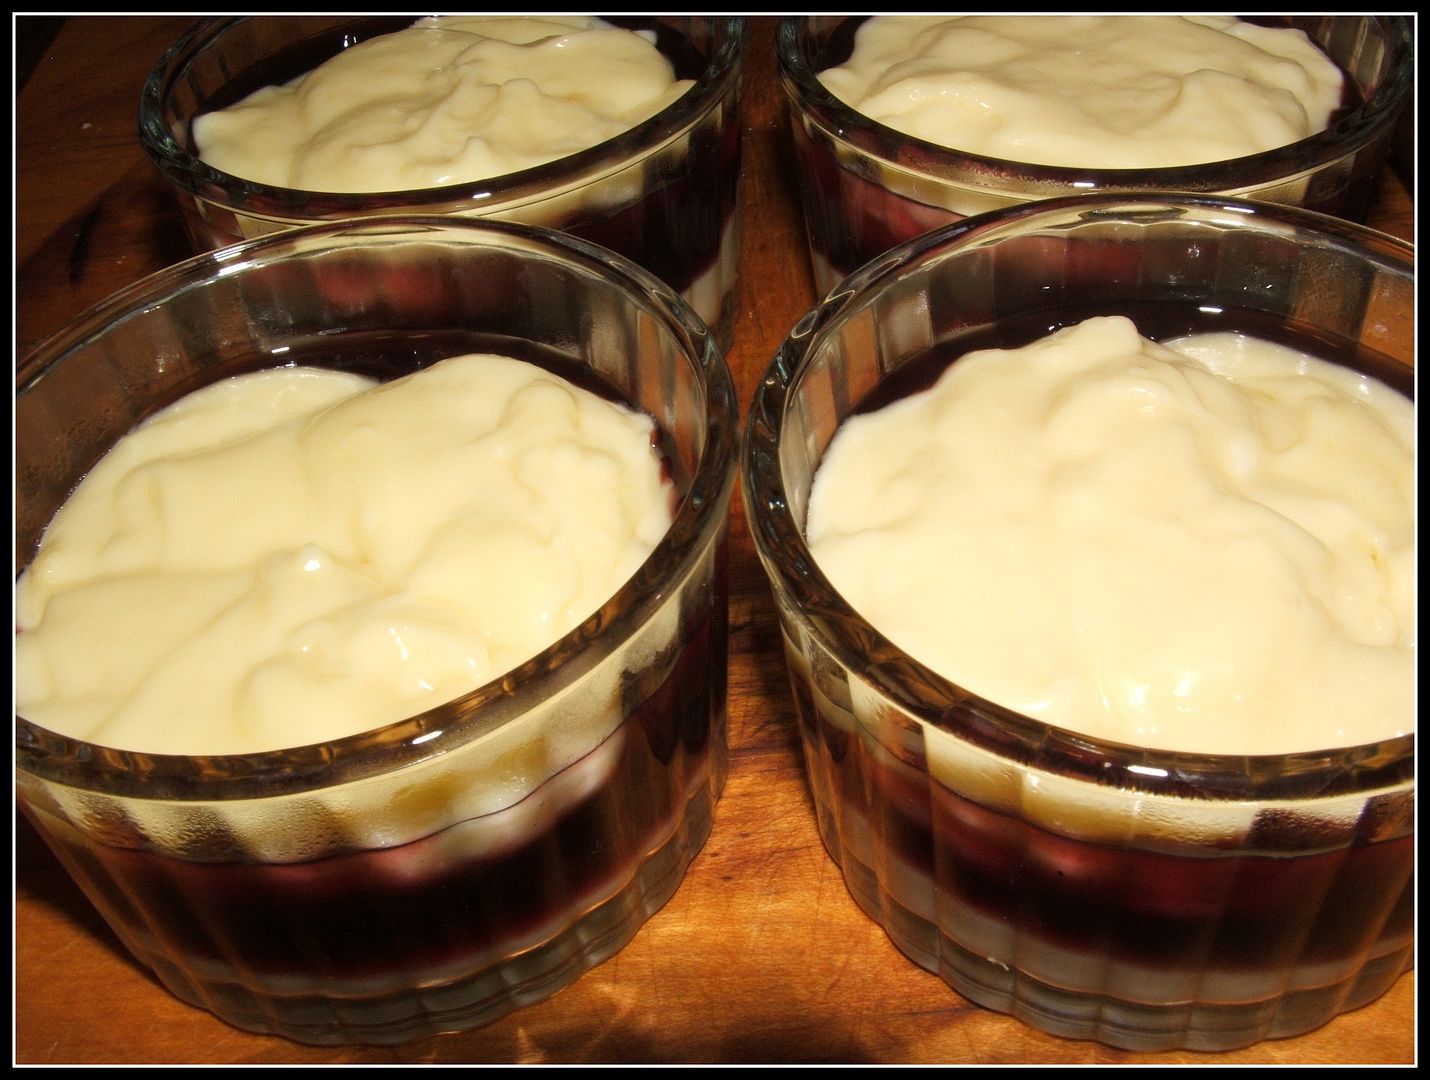 Blueberry Vanilla Creme Brulee by Angie Ouellette-Tower for godsgrowinggarden.com photo 010_zps89f38116.jpg